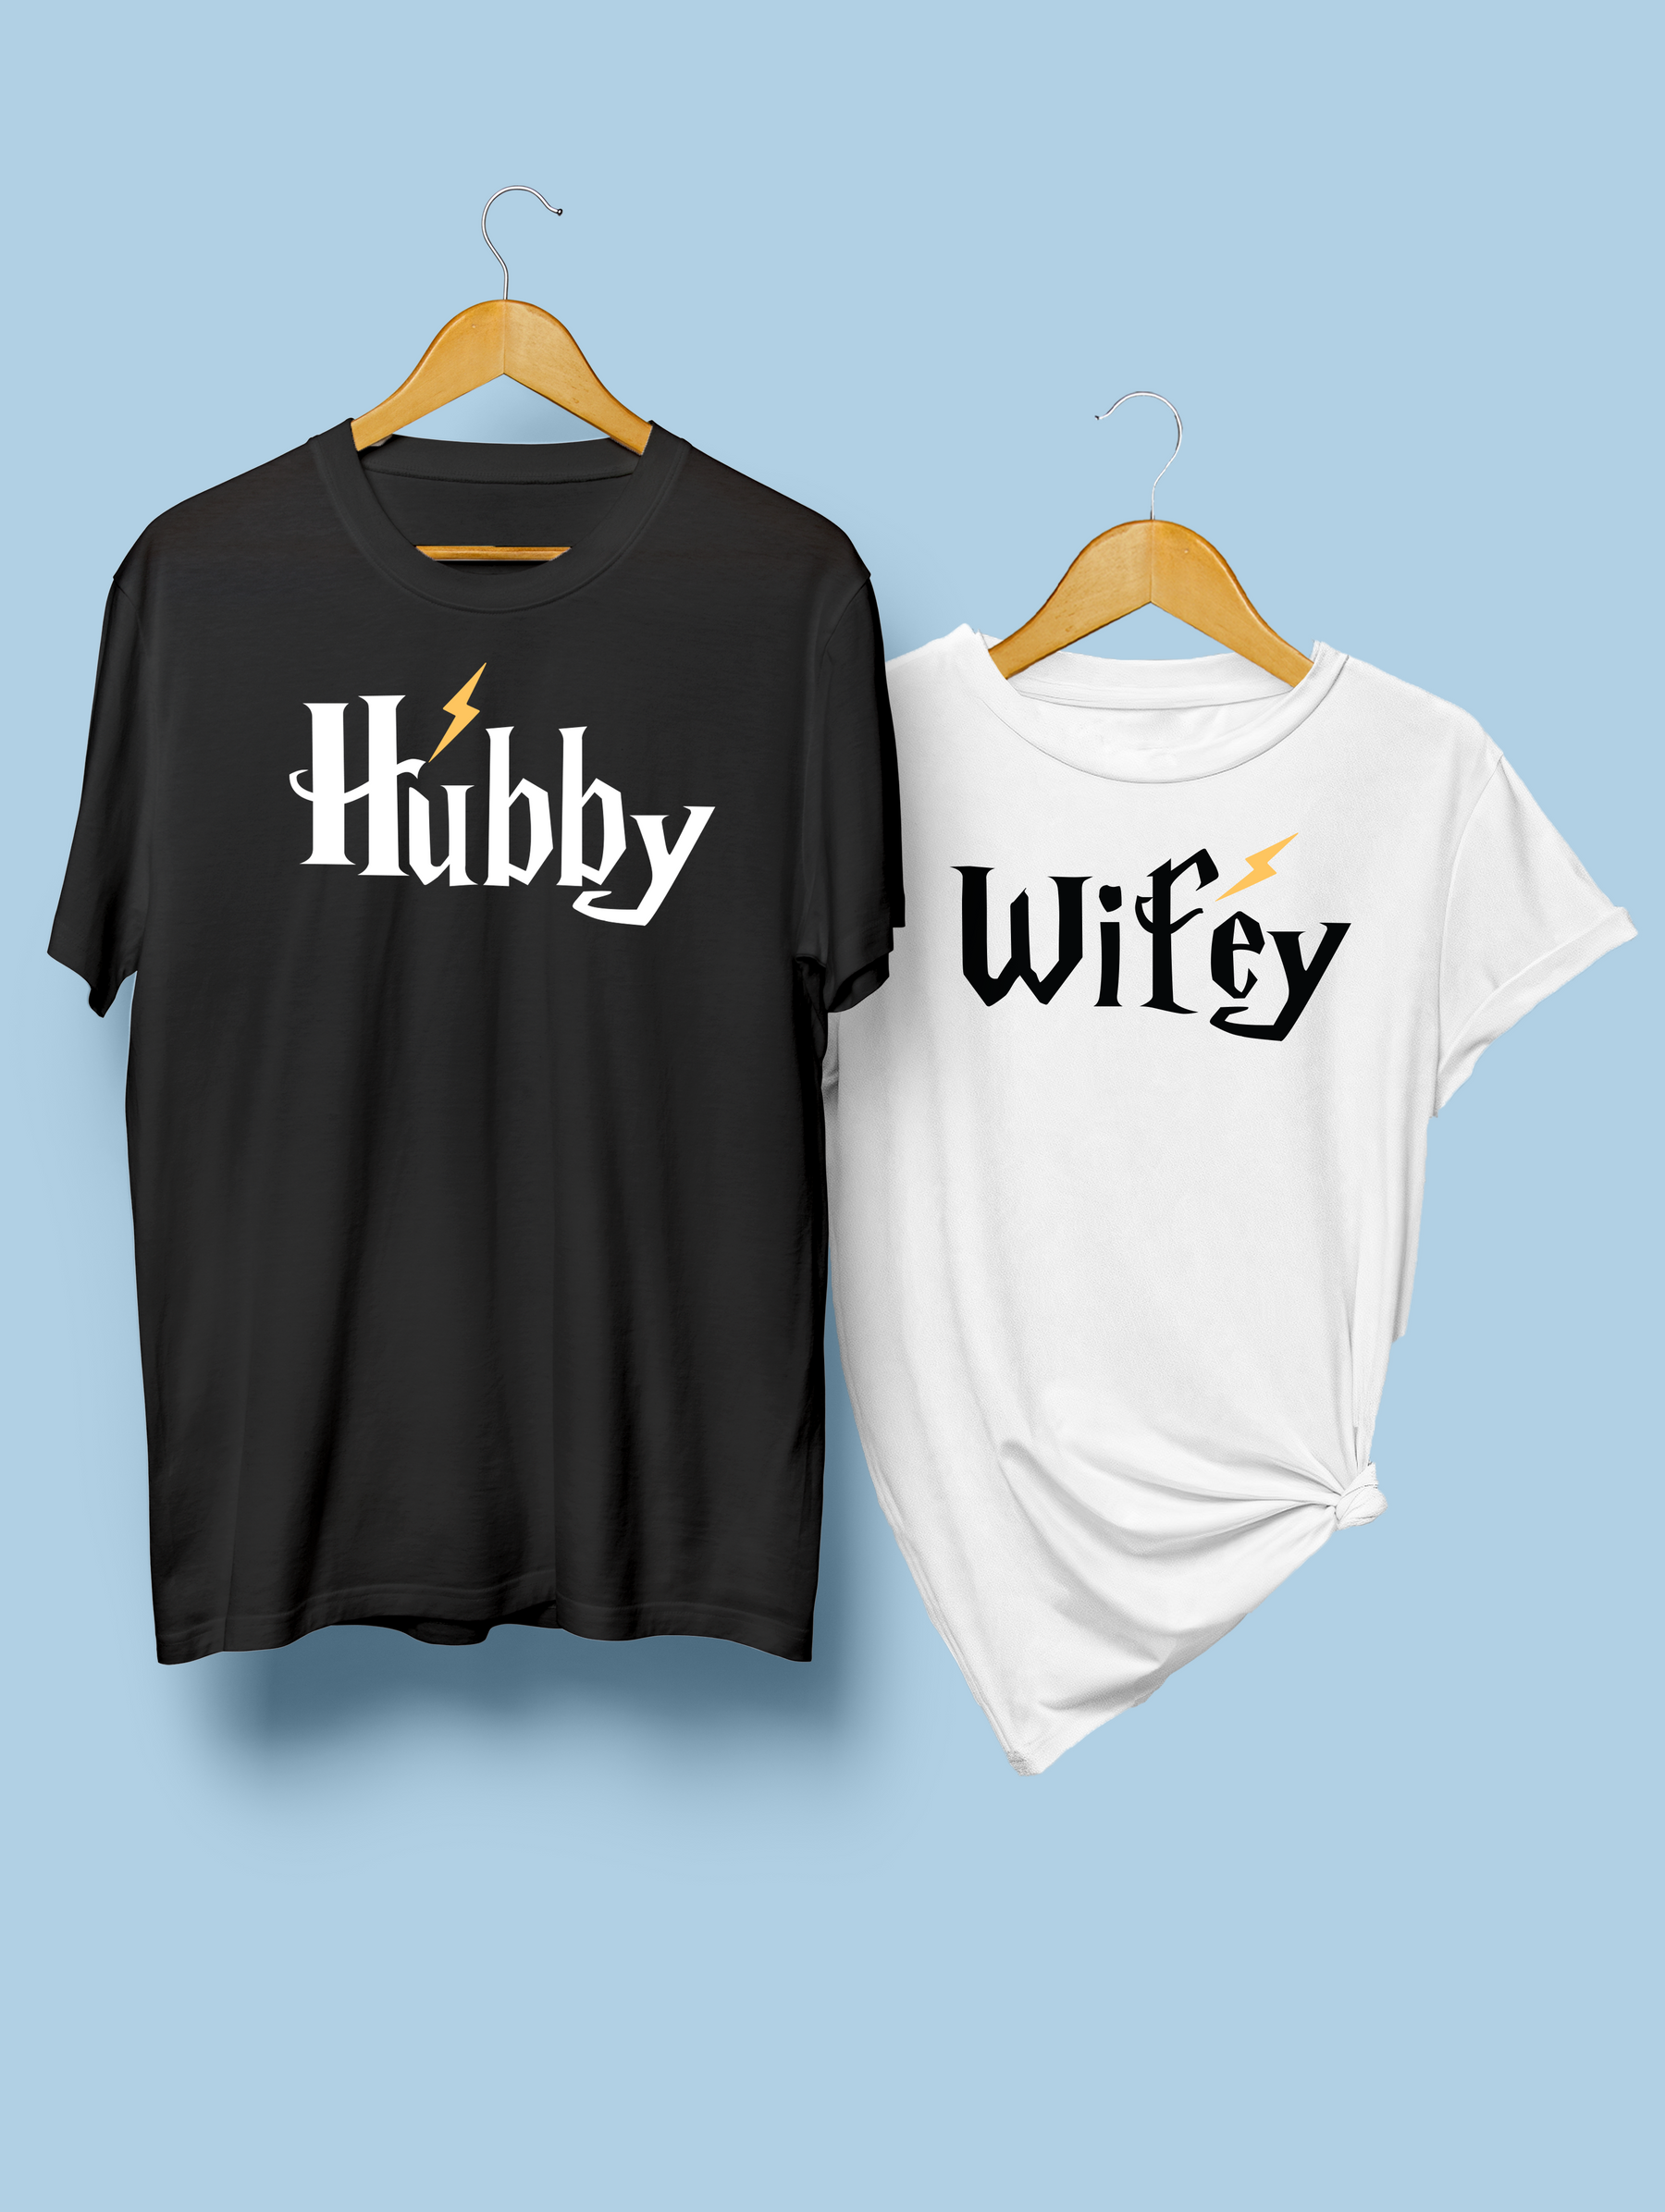 Hubby wifey harry potter Couples T-shirt